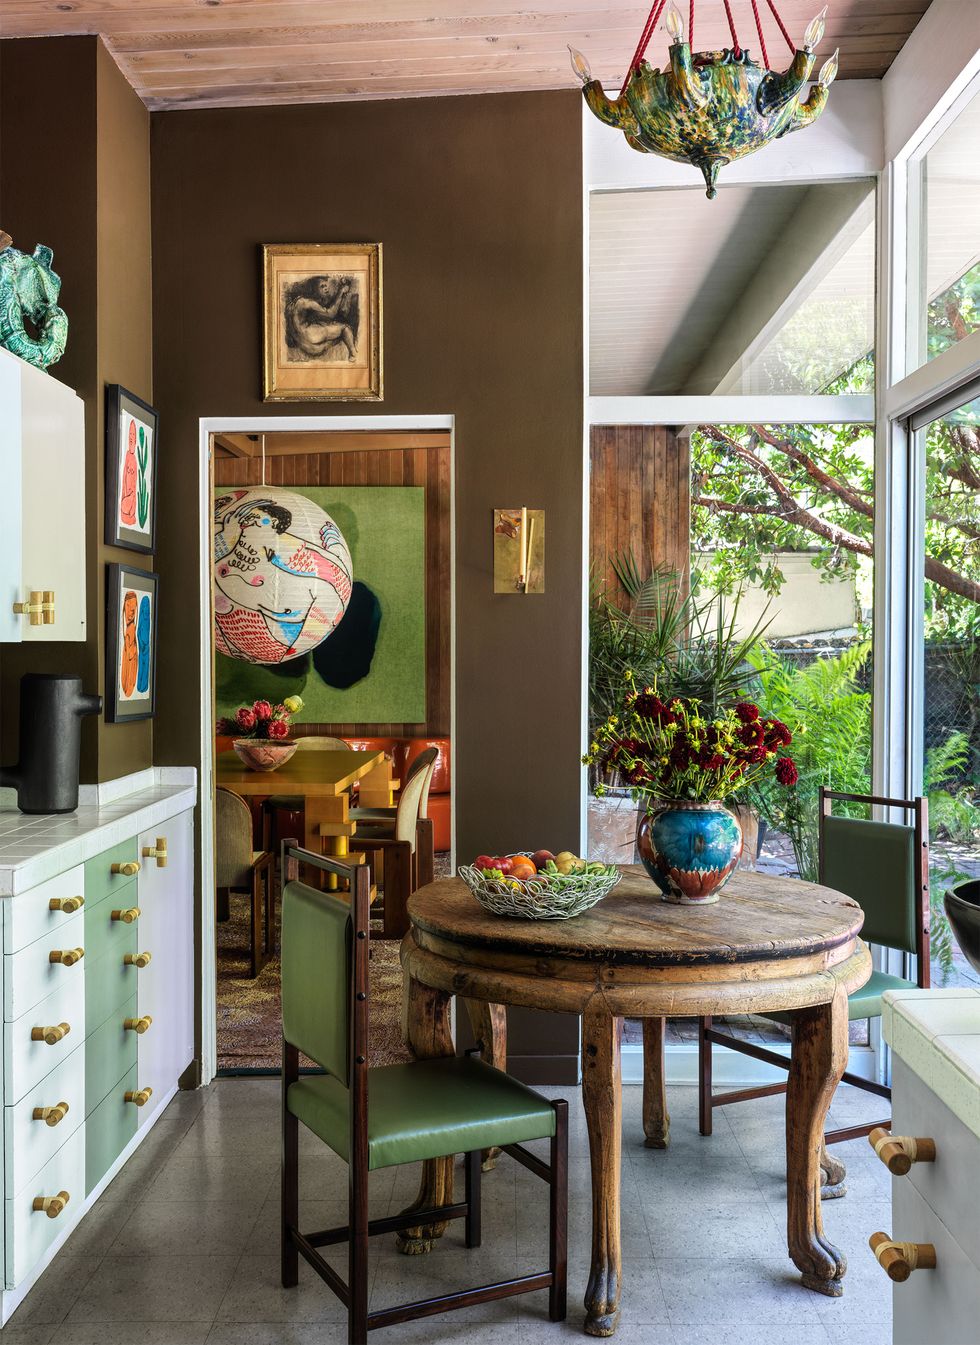 the kitchen has dark brown walls hung with small artworks, cabinets and drawers painted green and white, a small round antique wood table and two chairs with green leather seats, and a spanish majolica pendant